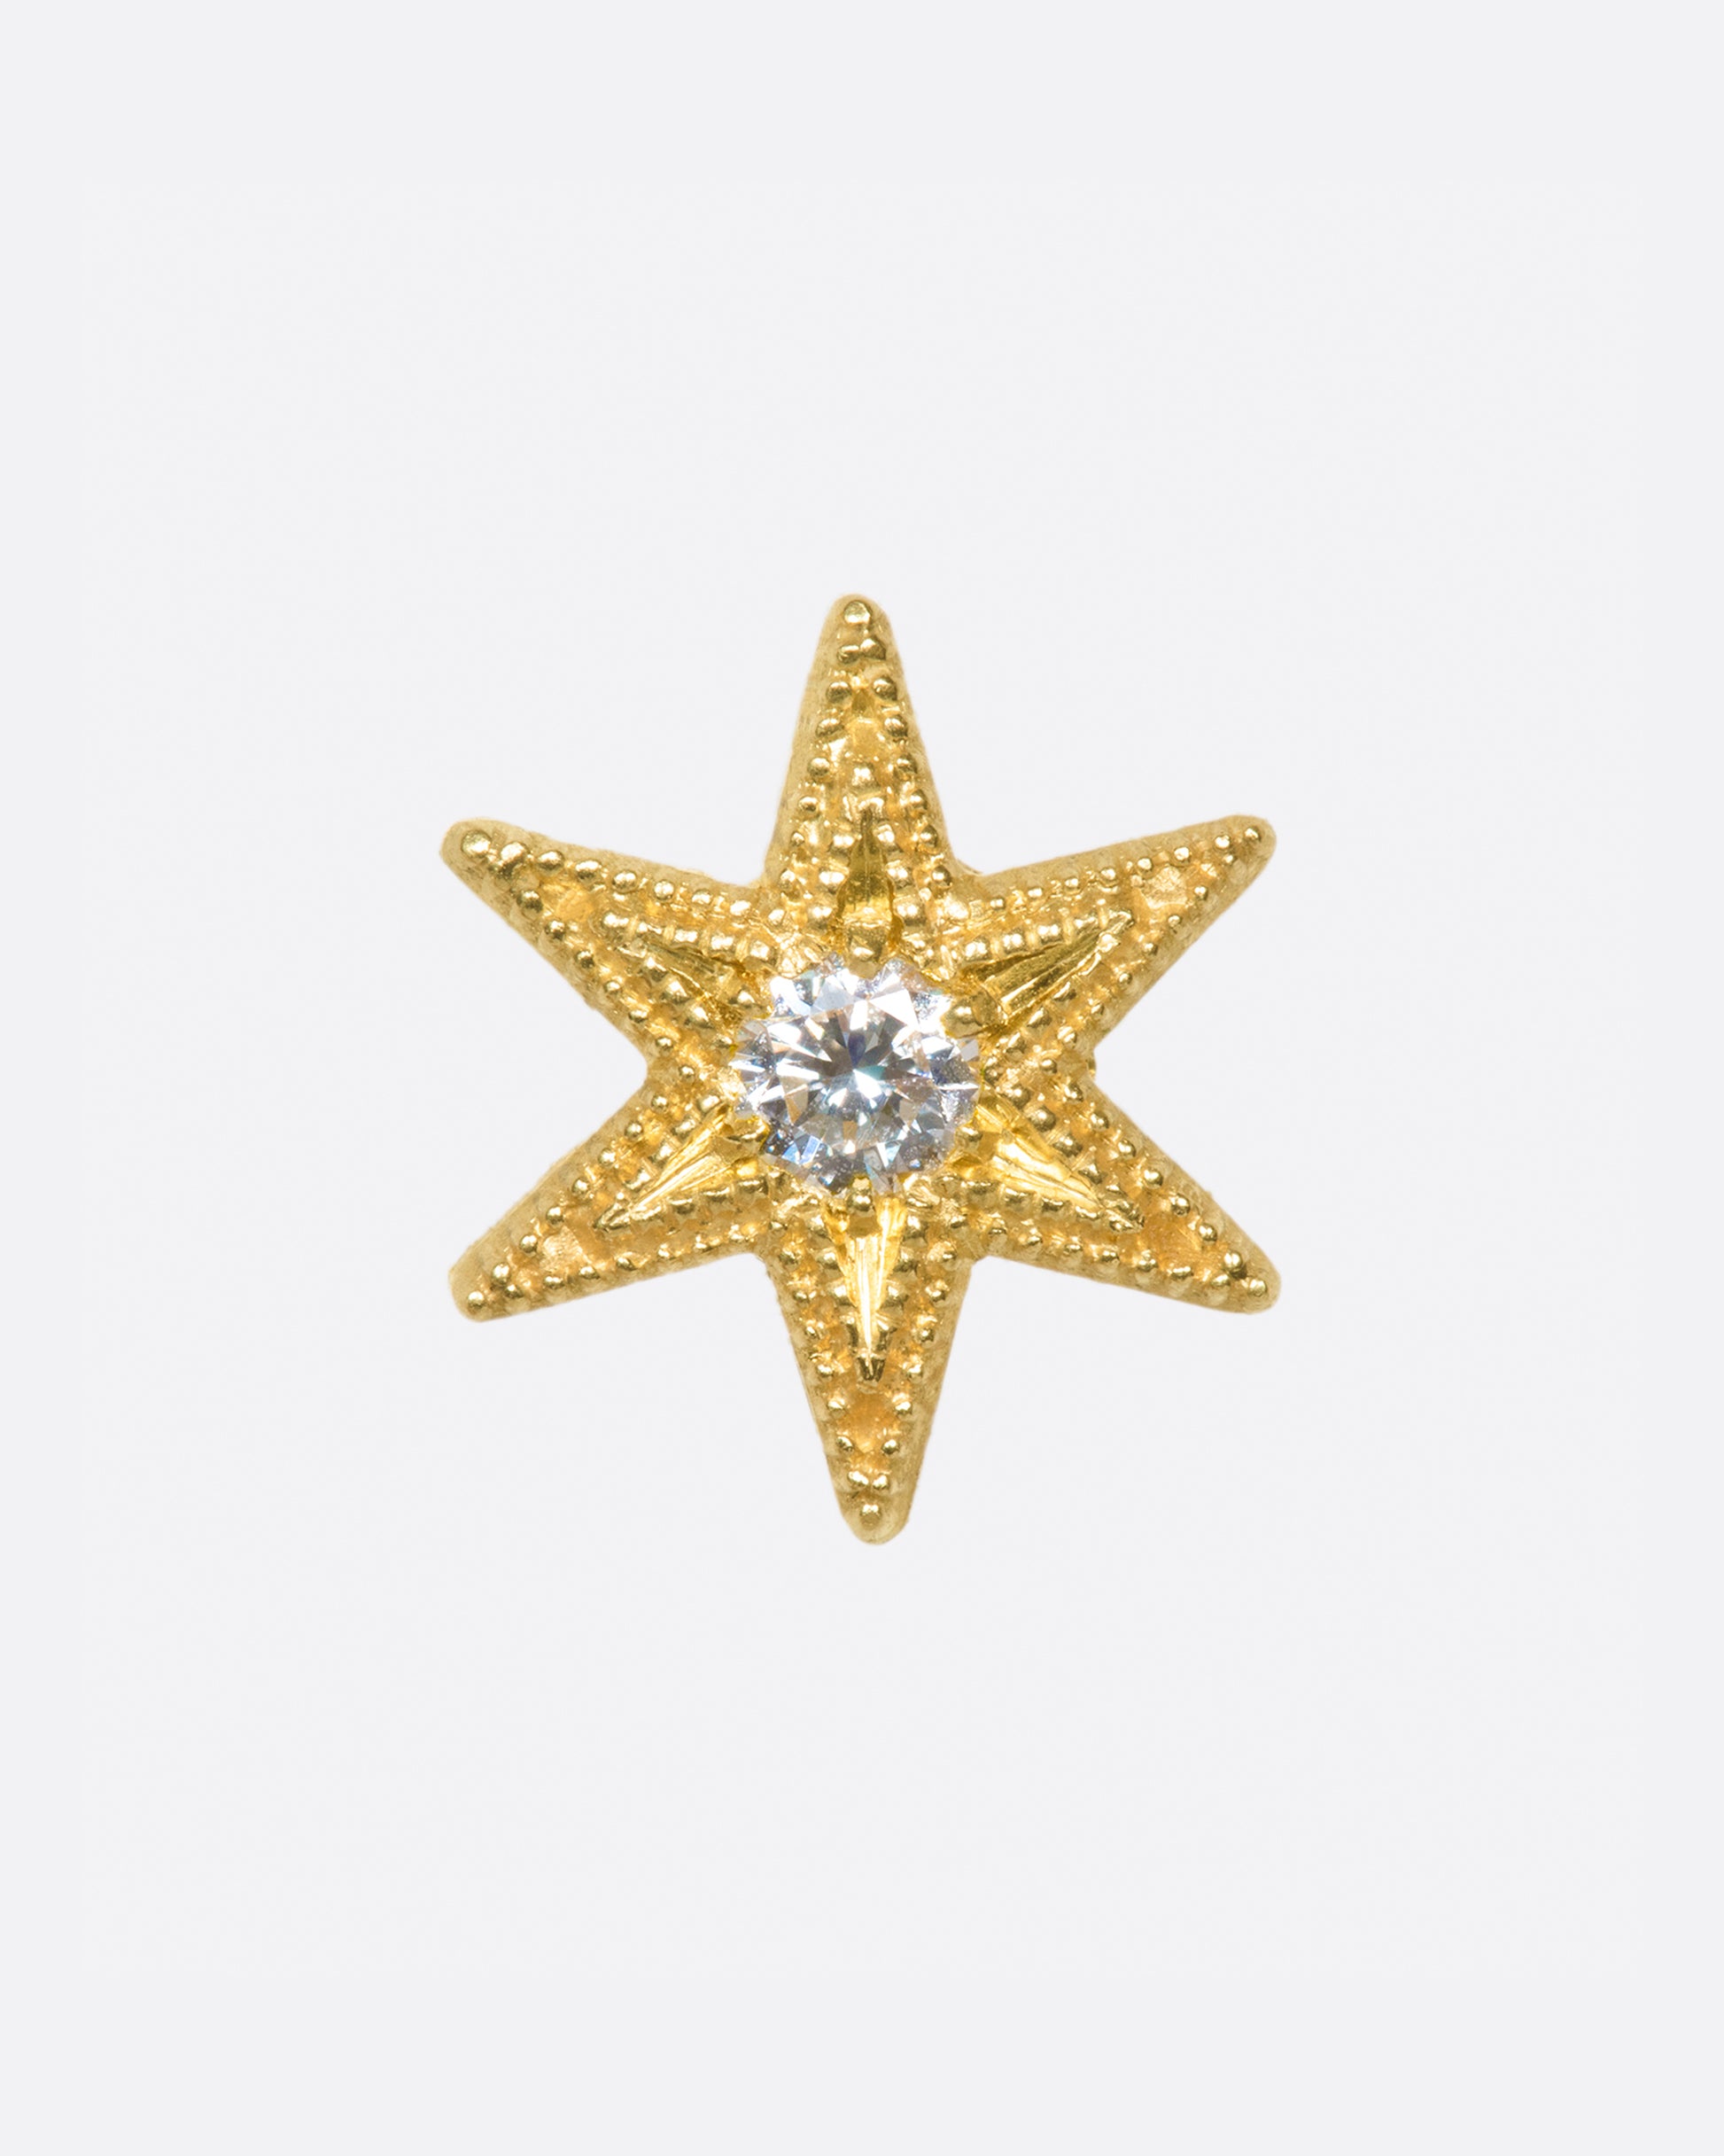 A six point star with millgrain texture and a bright white diamond center.